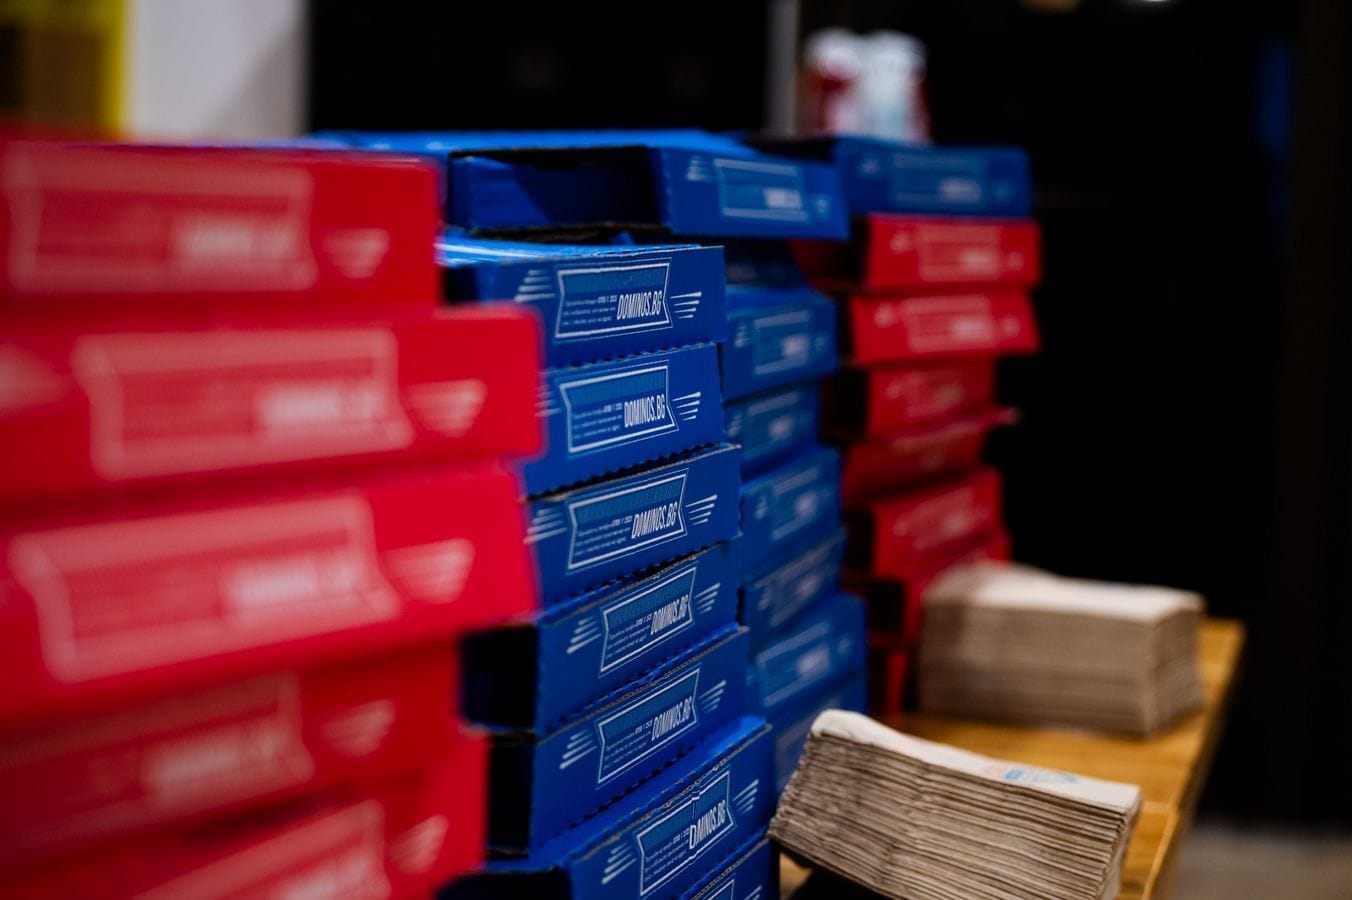 UniDays student discount: 35% off Domino's orders of £25 or more